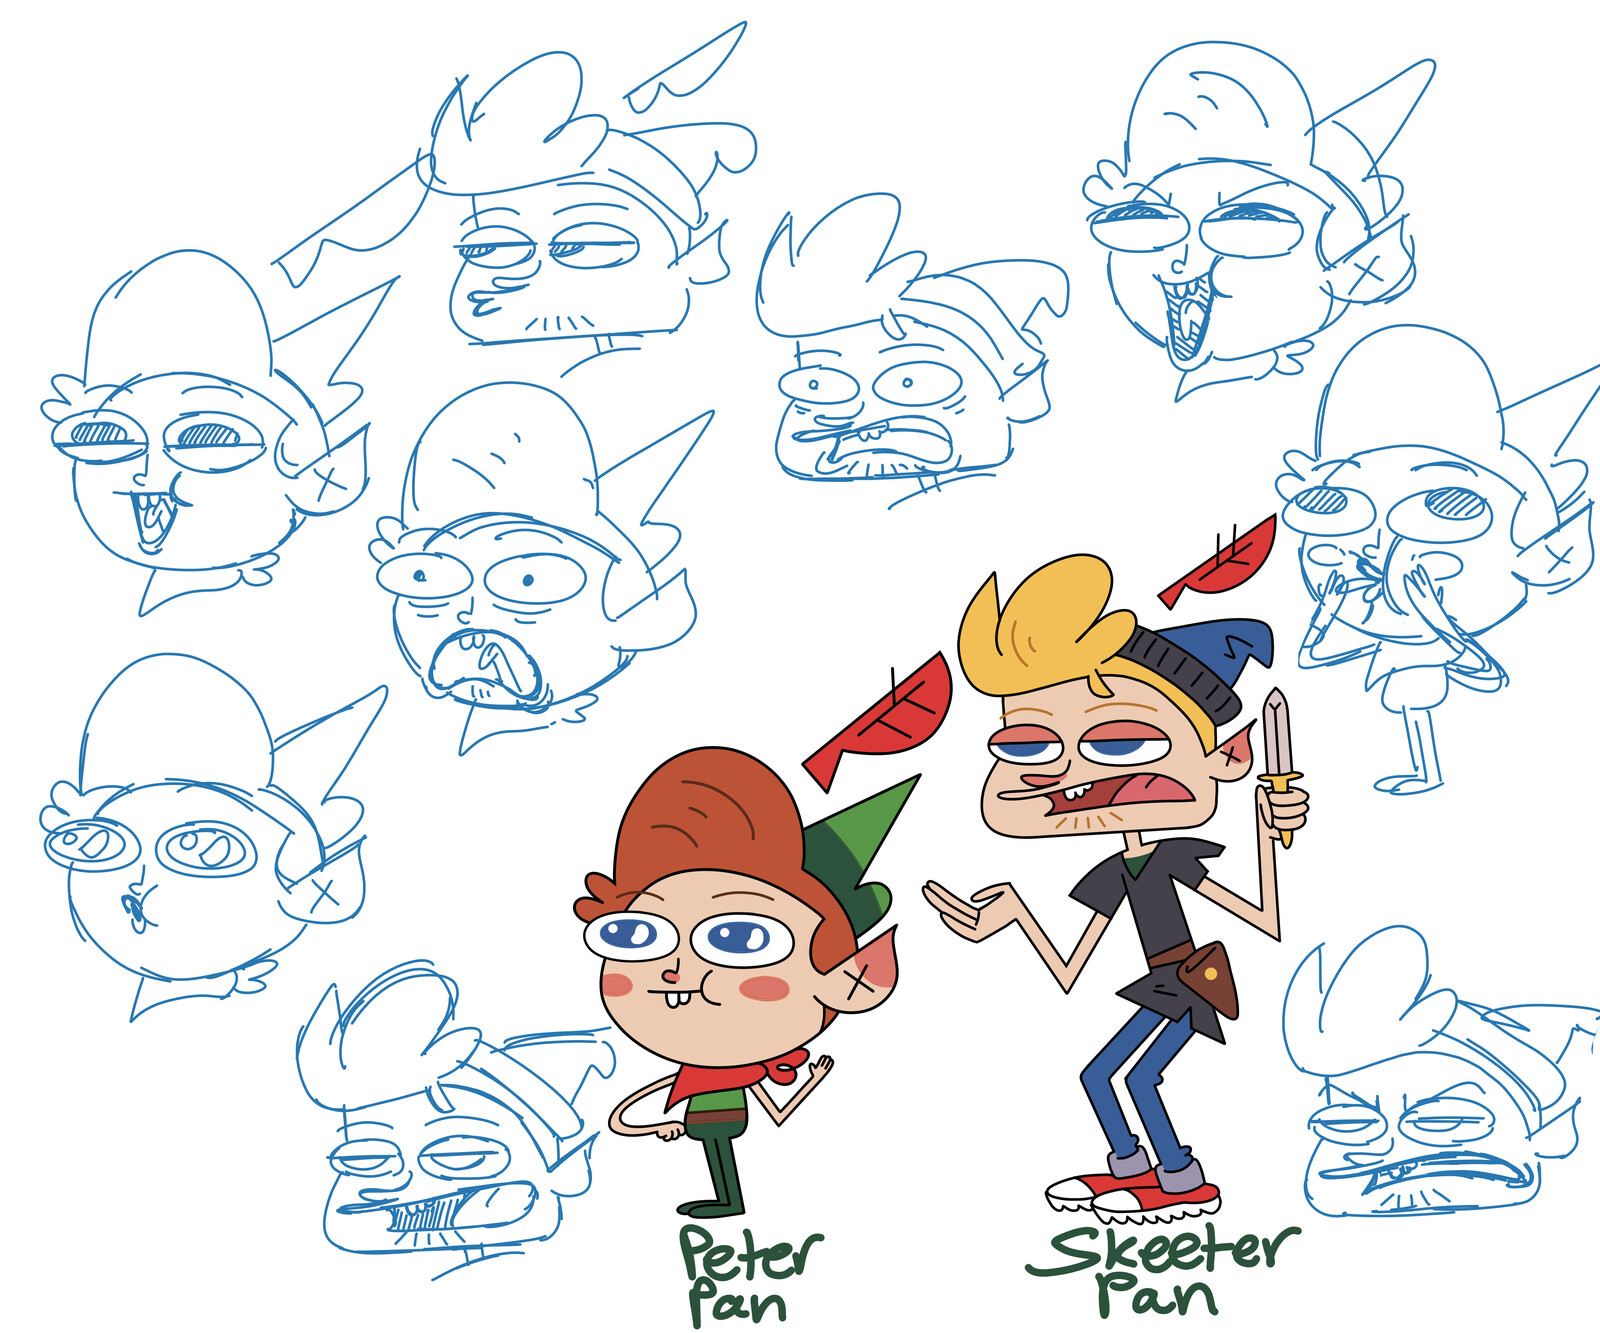 "Skeeter Pan" Character/Expression Concepts